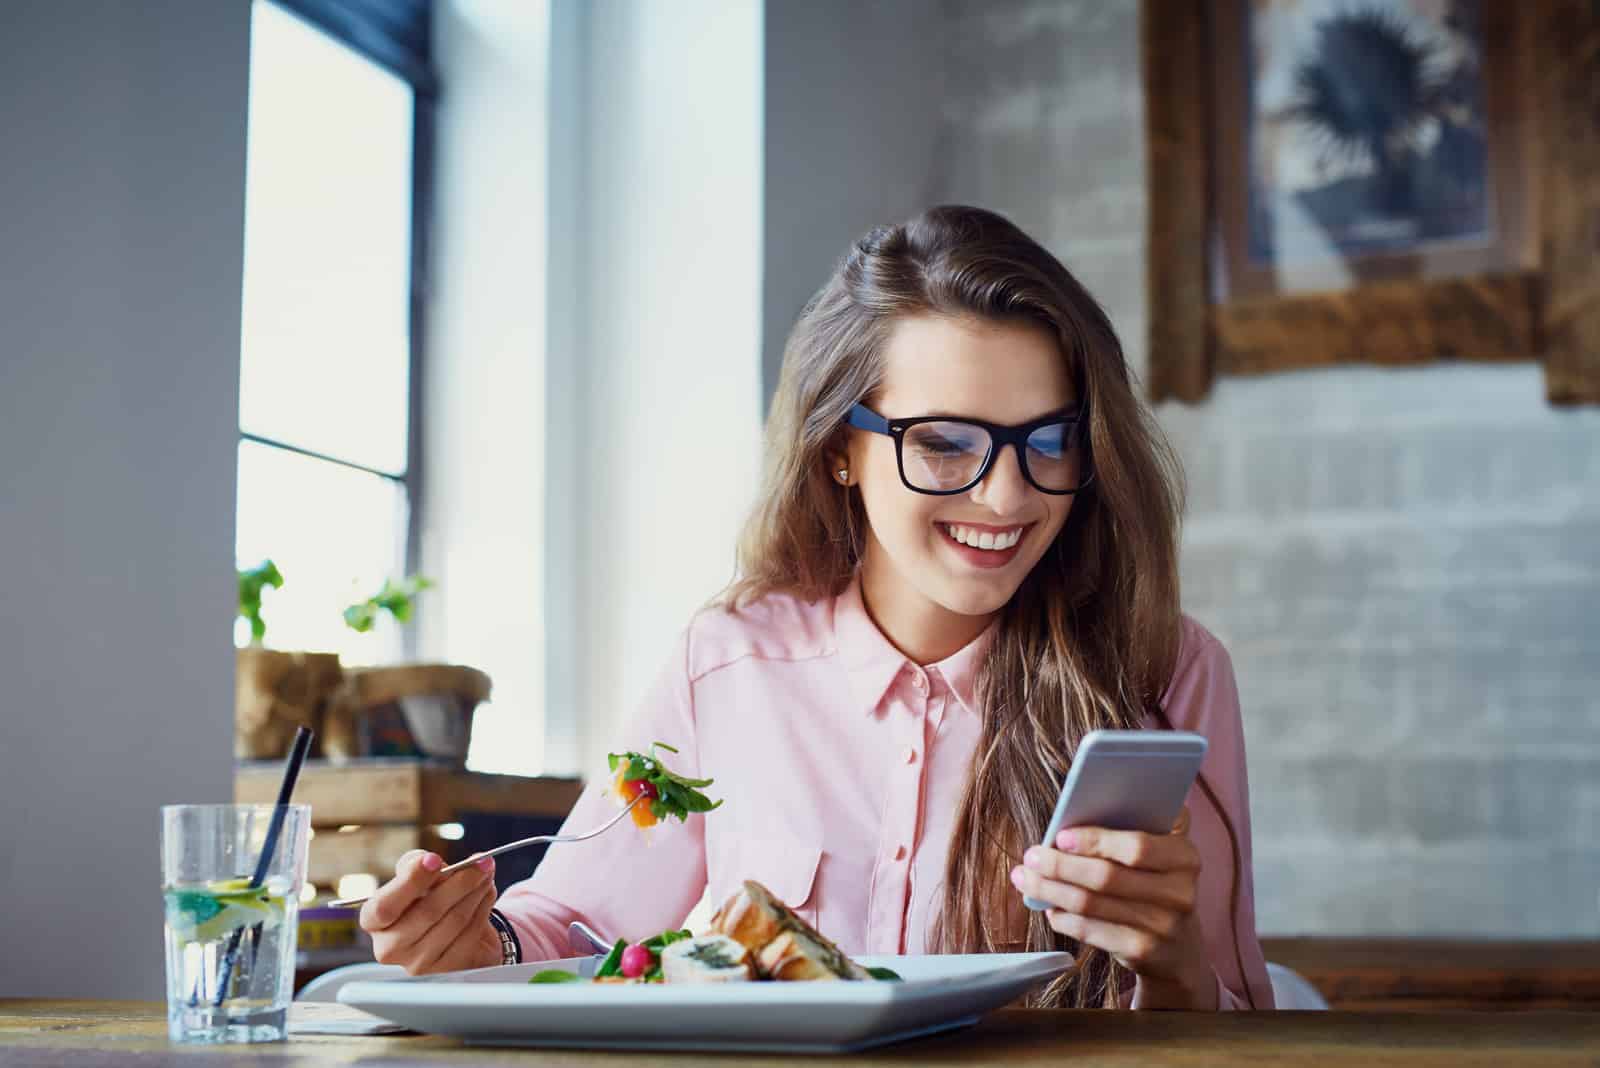 a smiling woman sitting at a table eating and pressing a phone